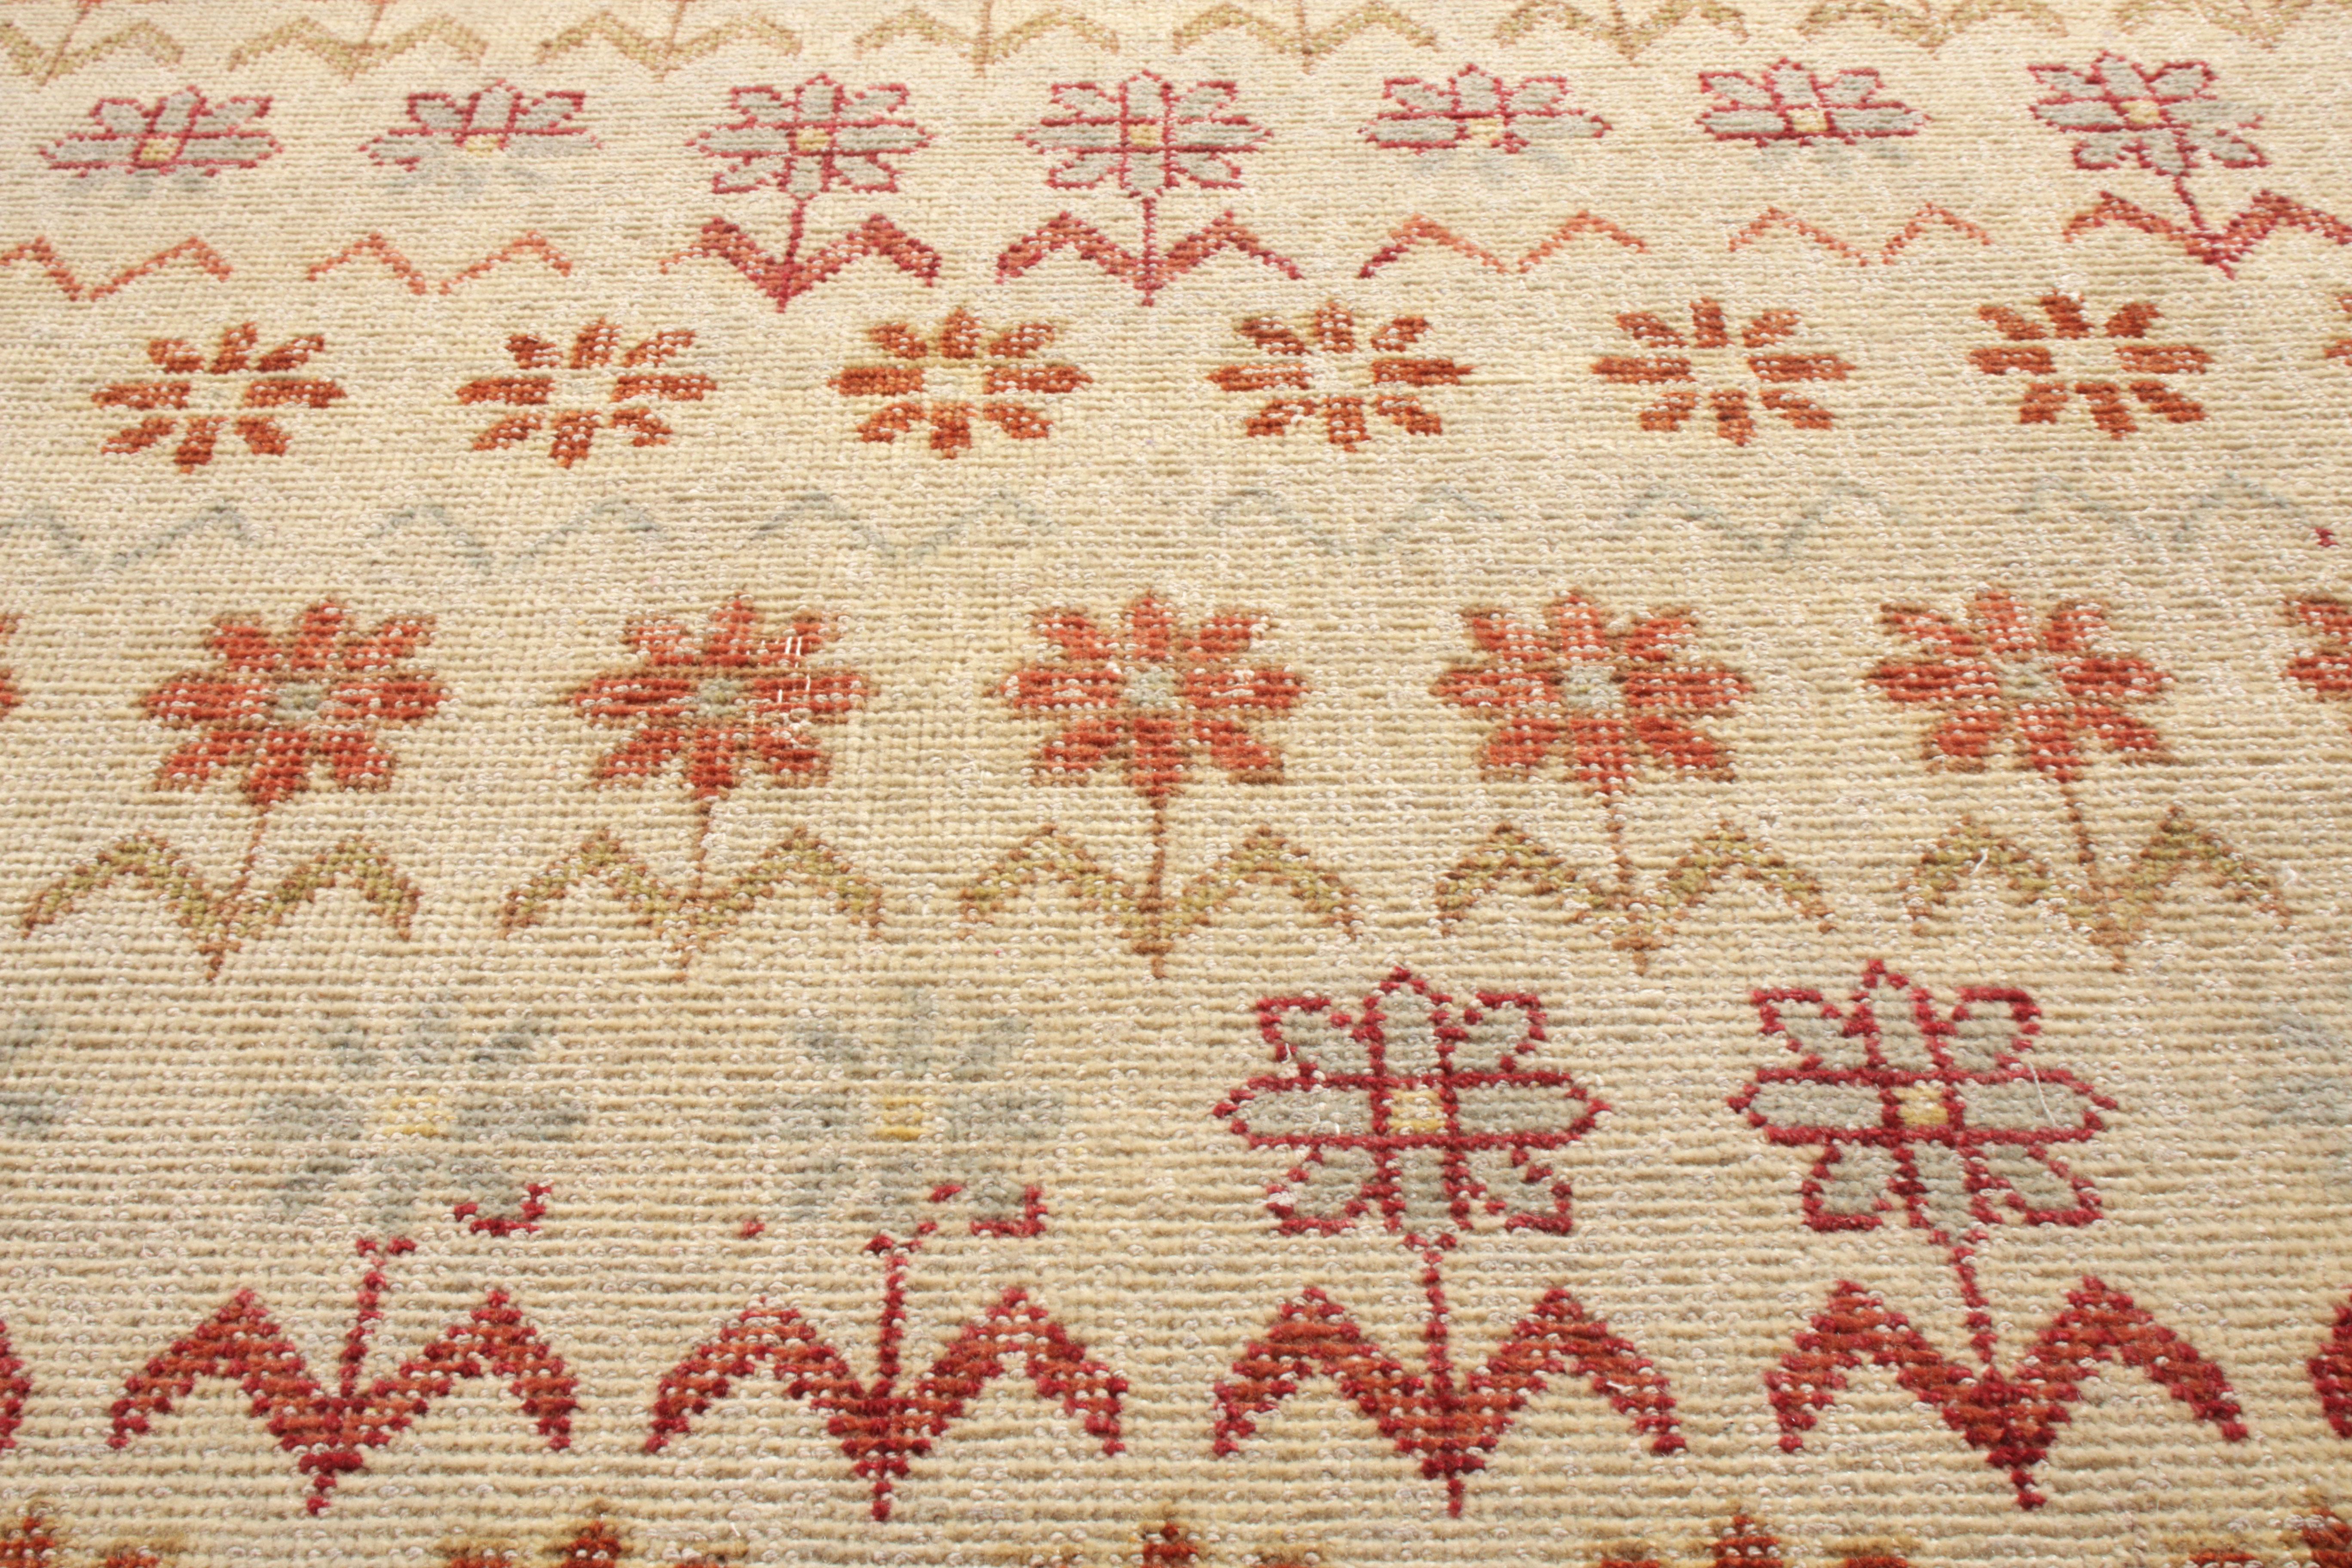 Indian Rug & Kilim’s Distressed Style Rug in Beige-Brown and Red Floral Pattern For Sale